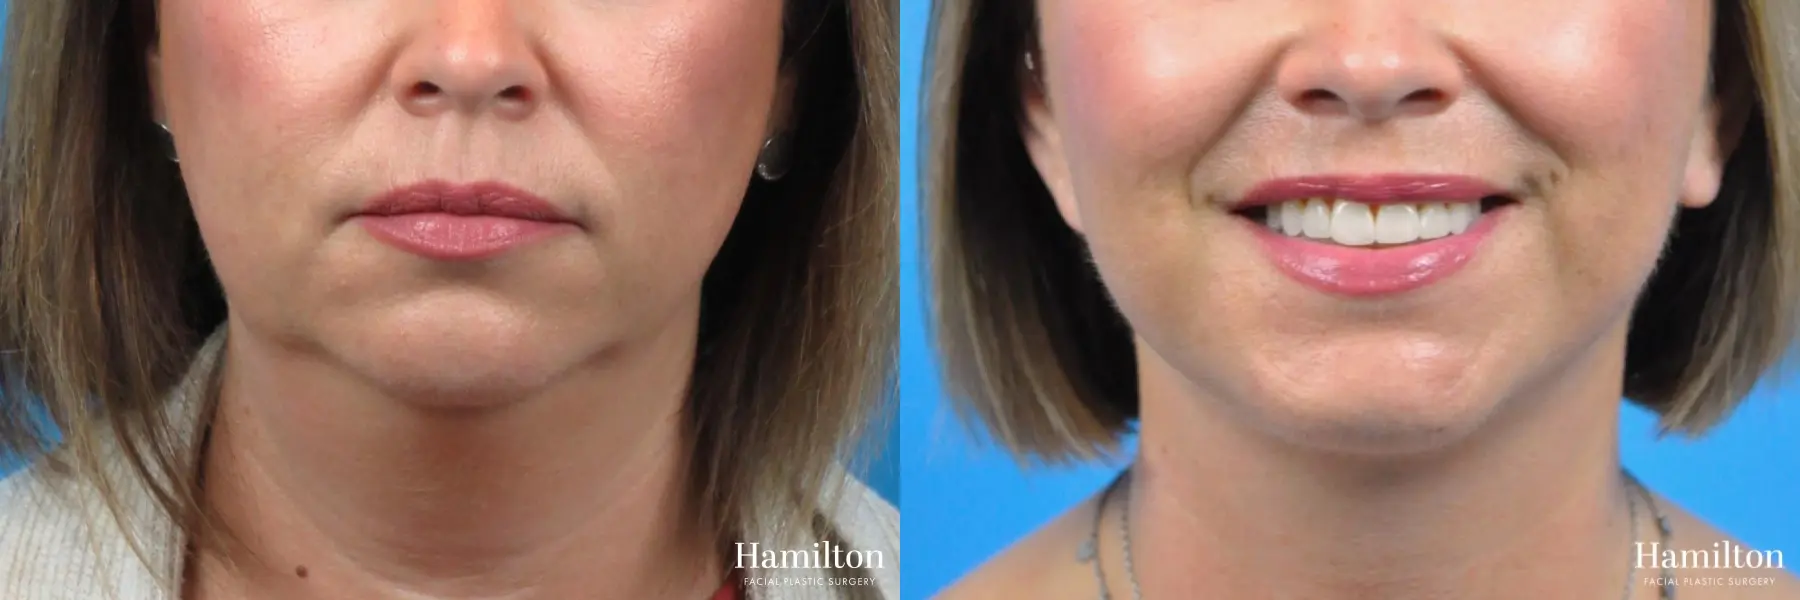 Facelift: Patient 5 - Before and After 2